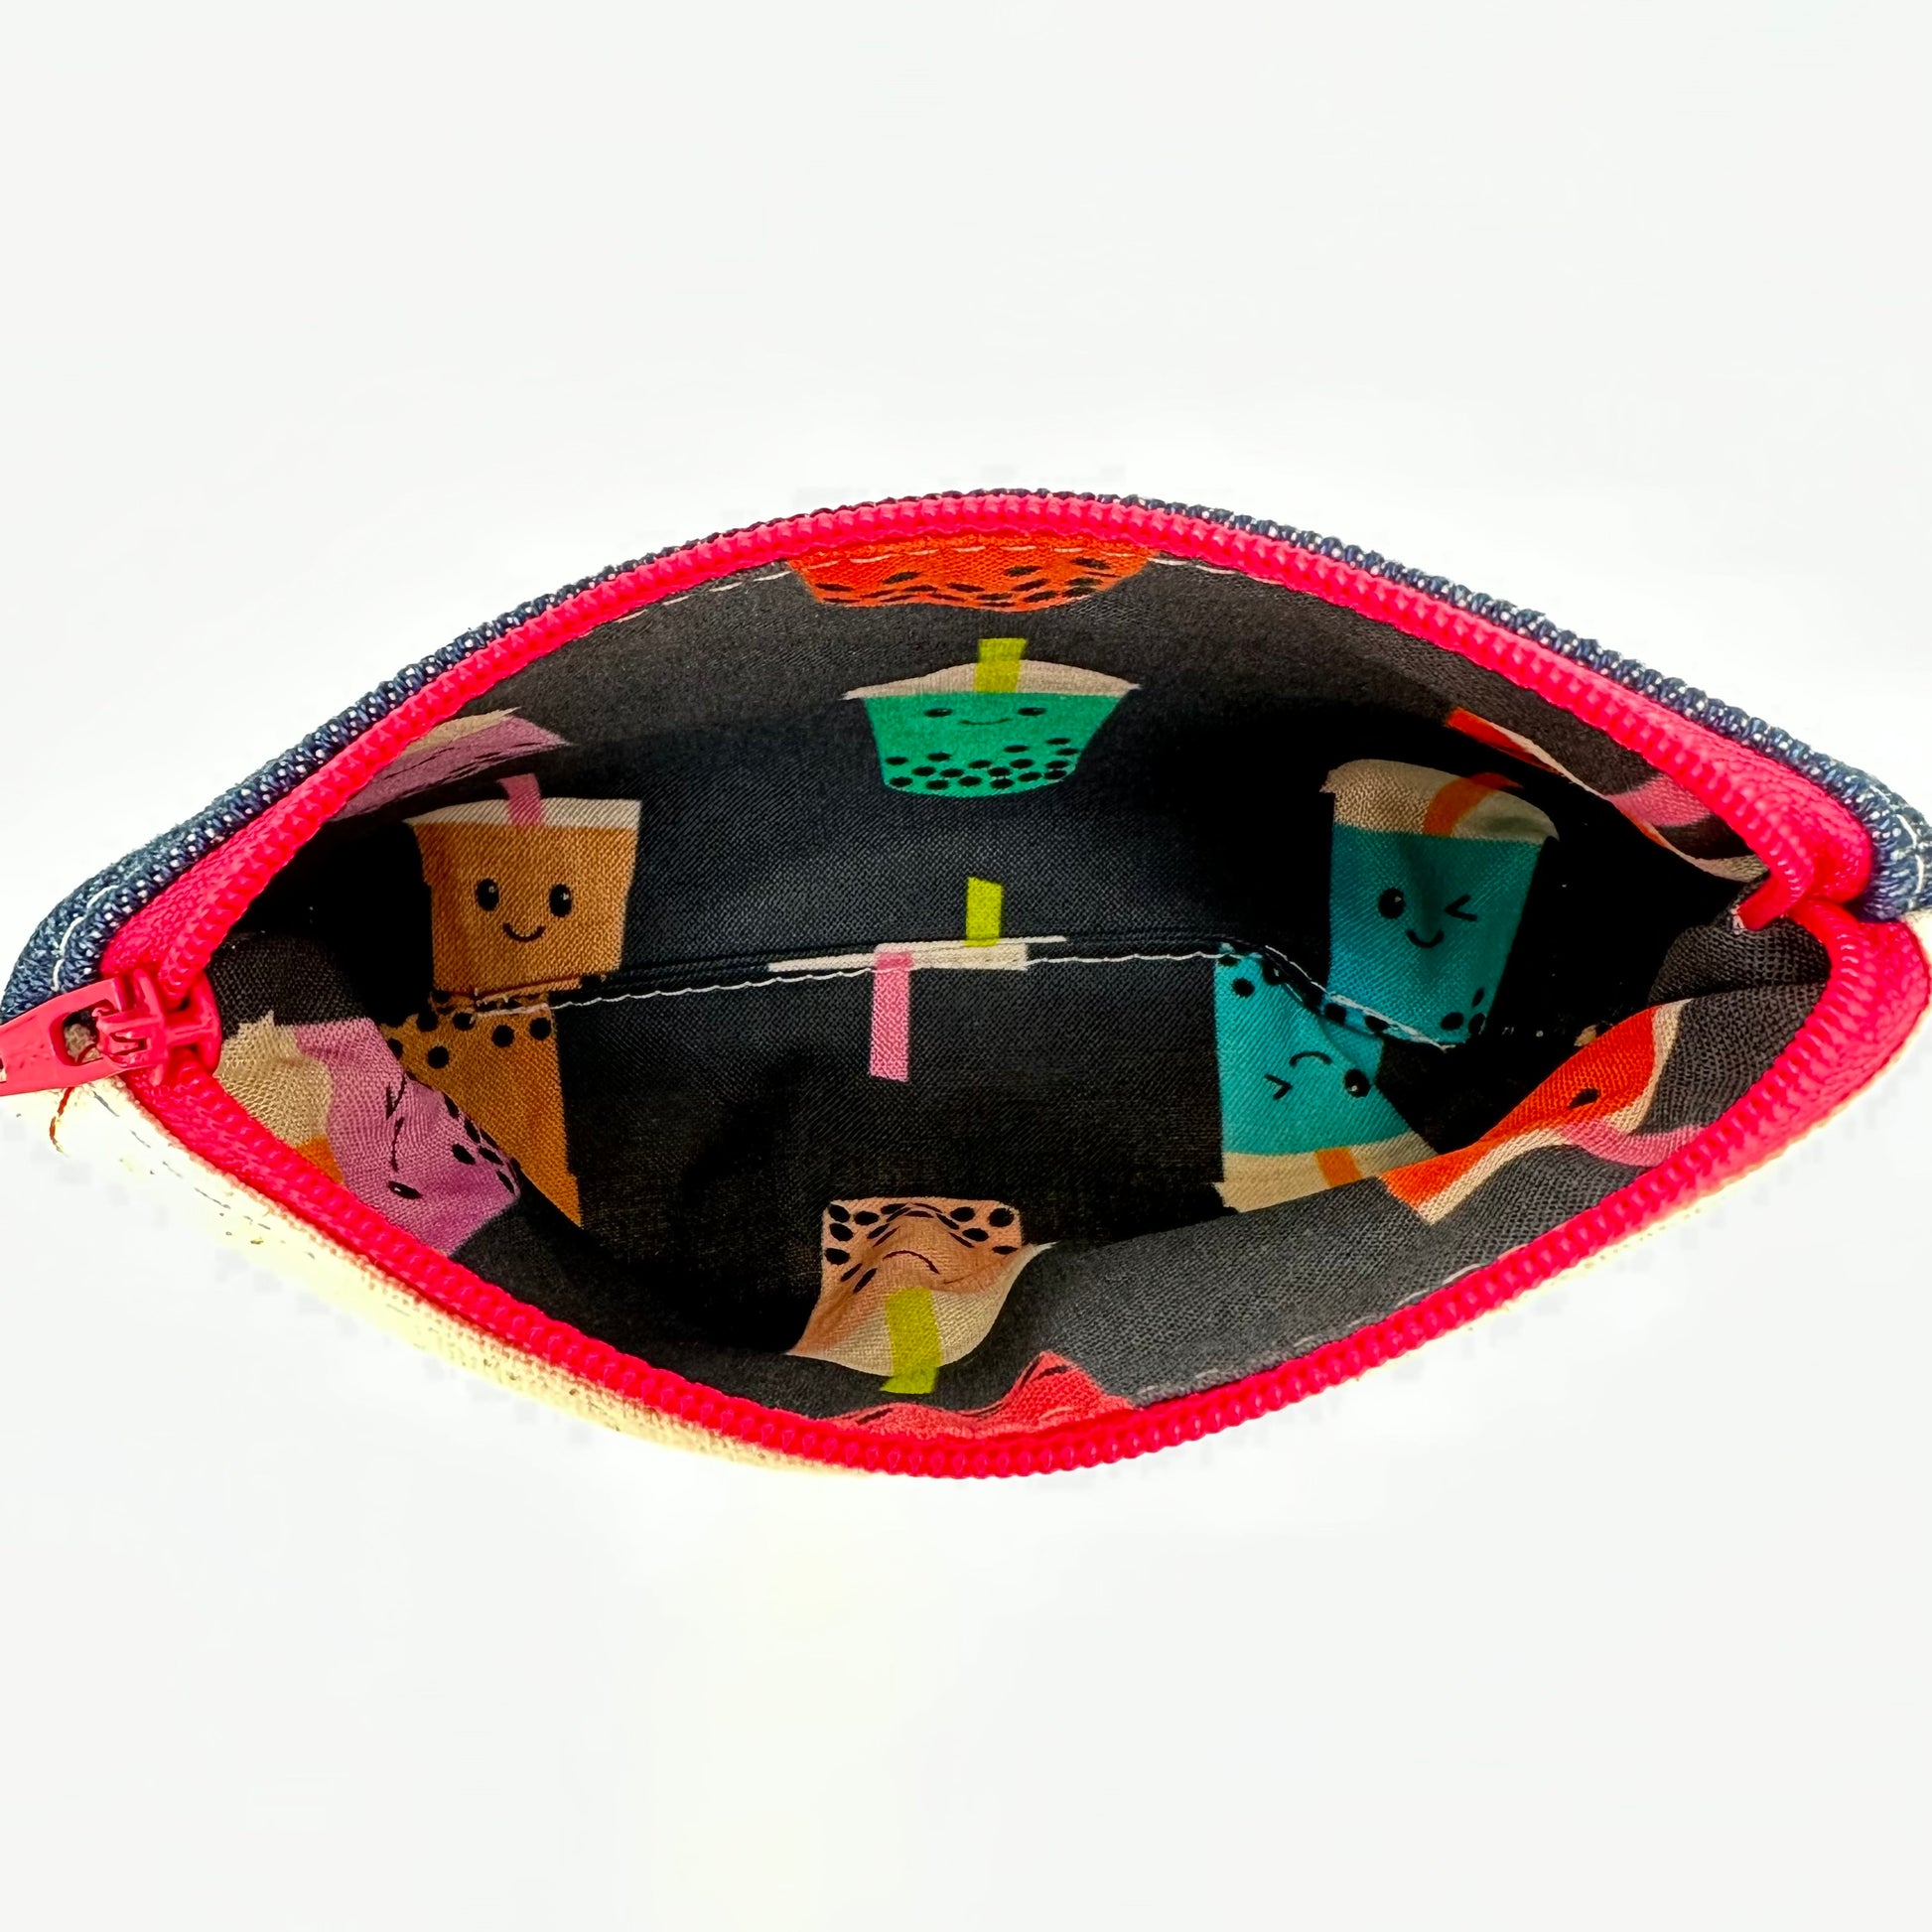 Inside of boba pouch showing fabric with boba print.